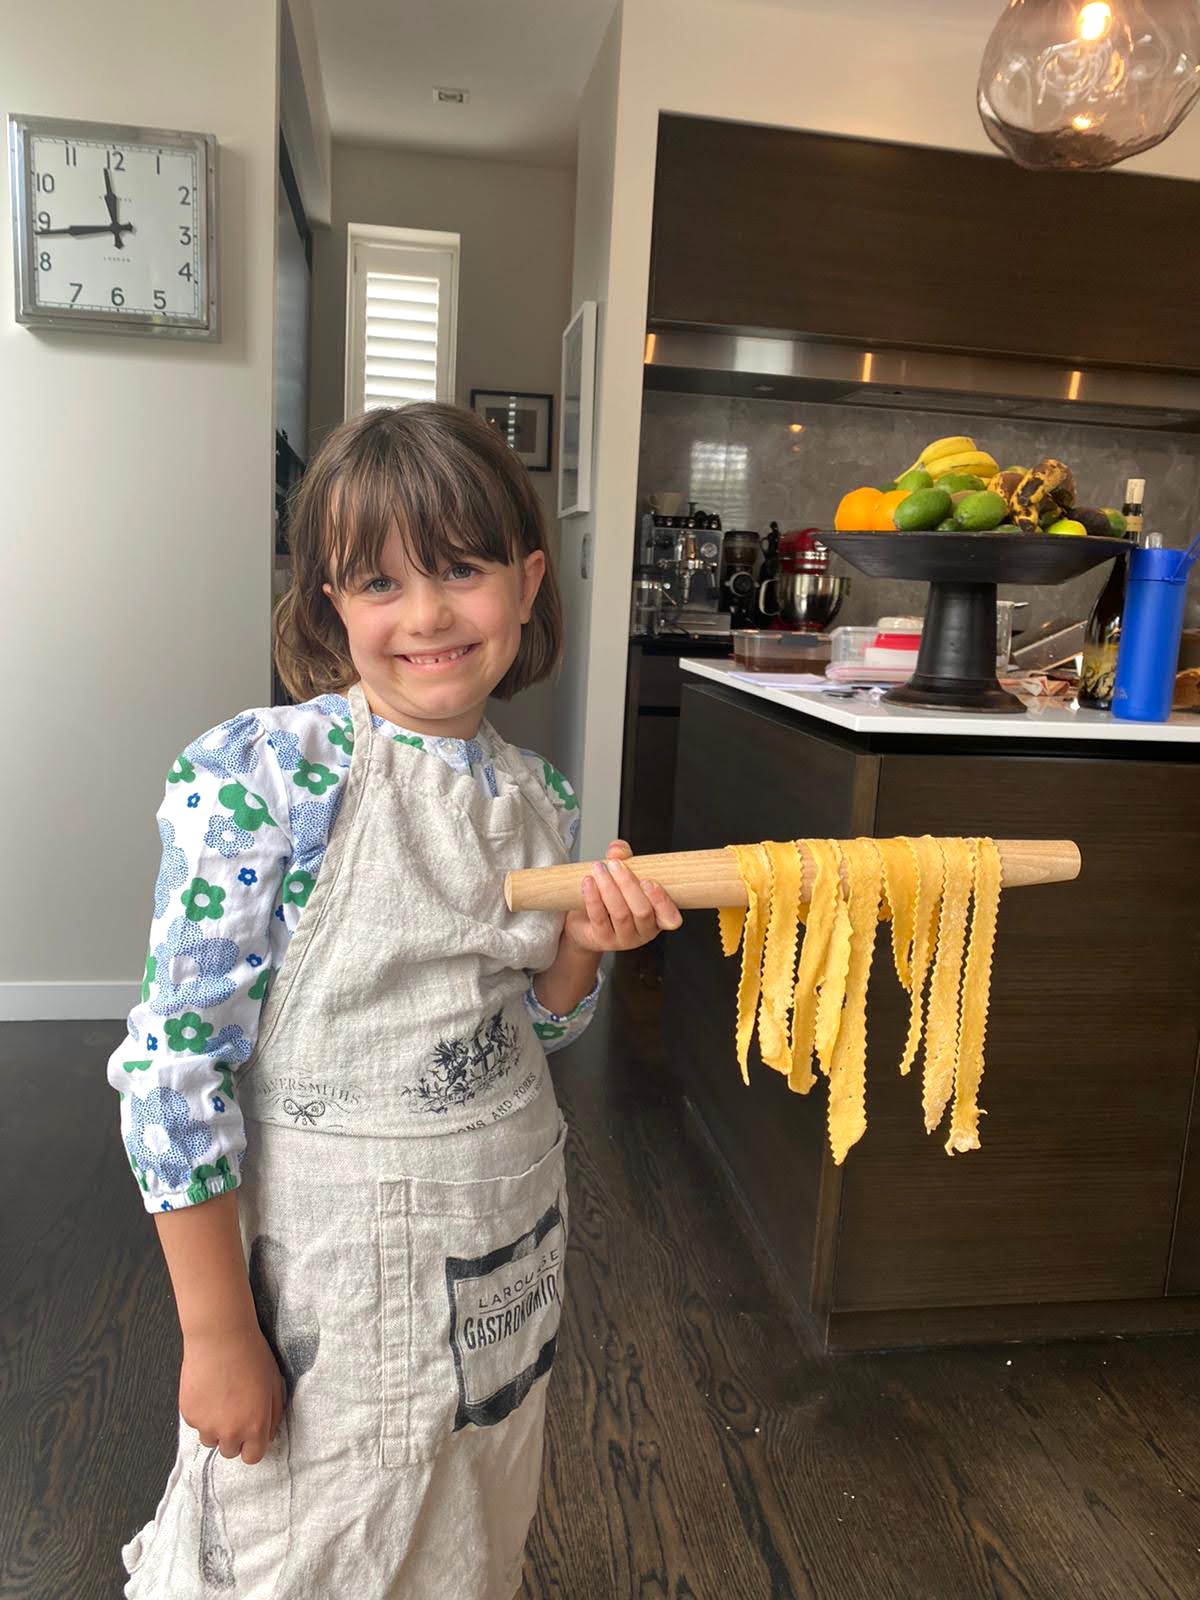 Gabriella Guise, pictured making pasta during a COVID-19 lockdown, was delighted when she found out there was no school.